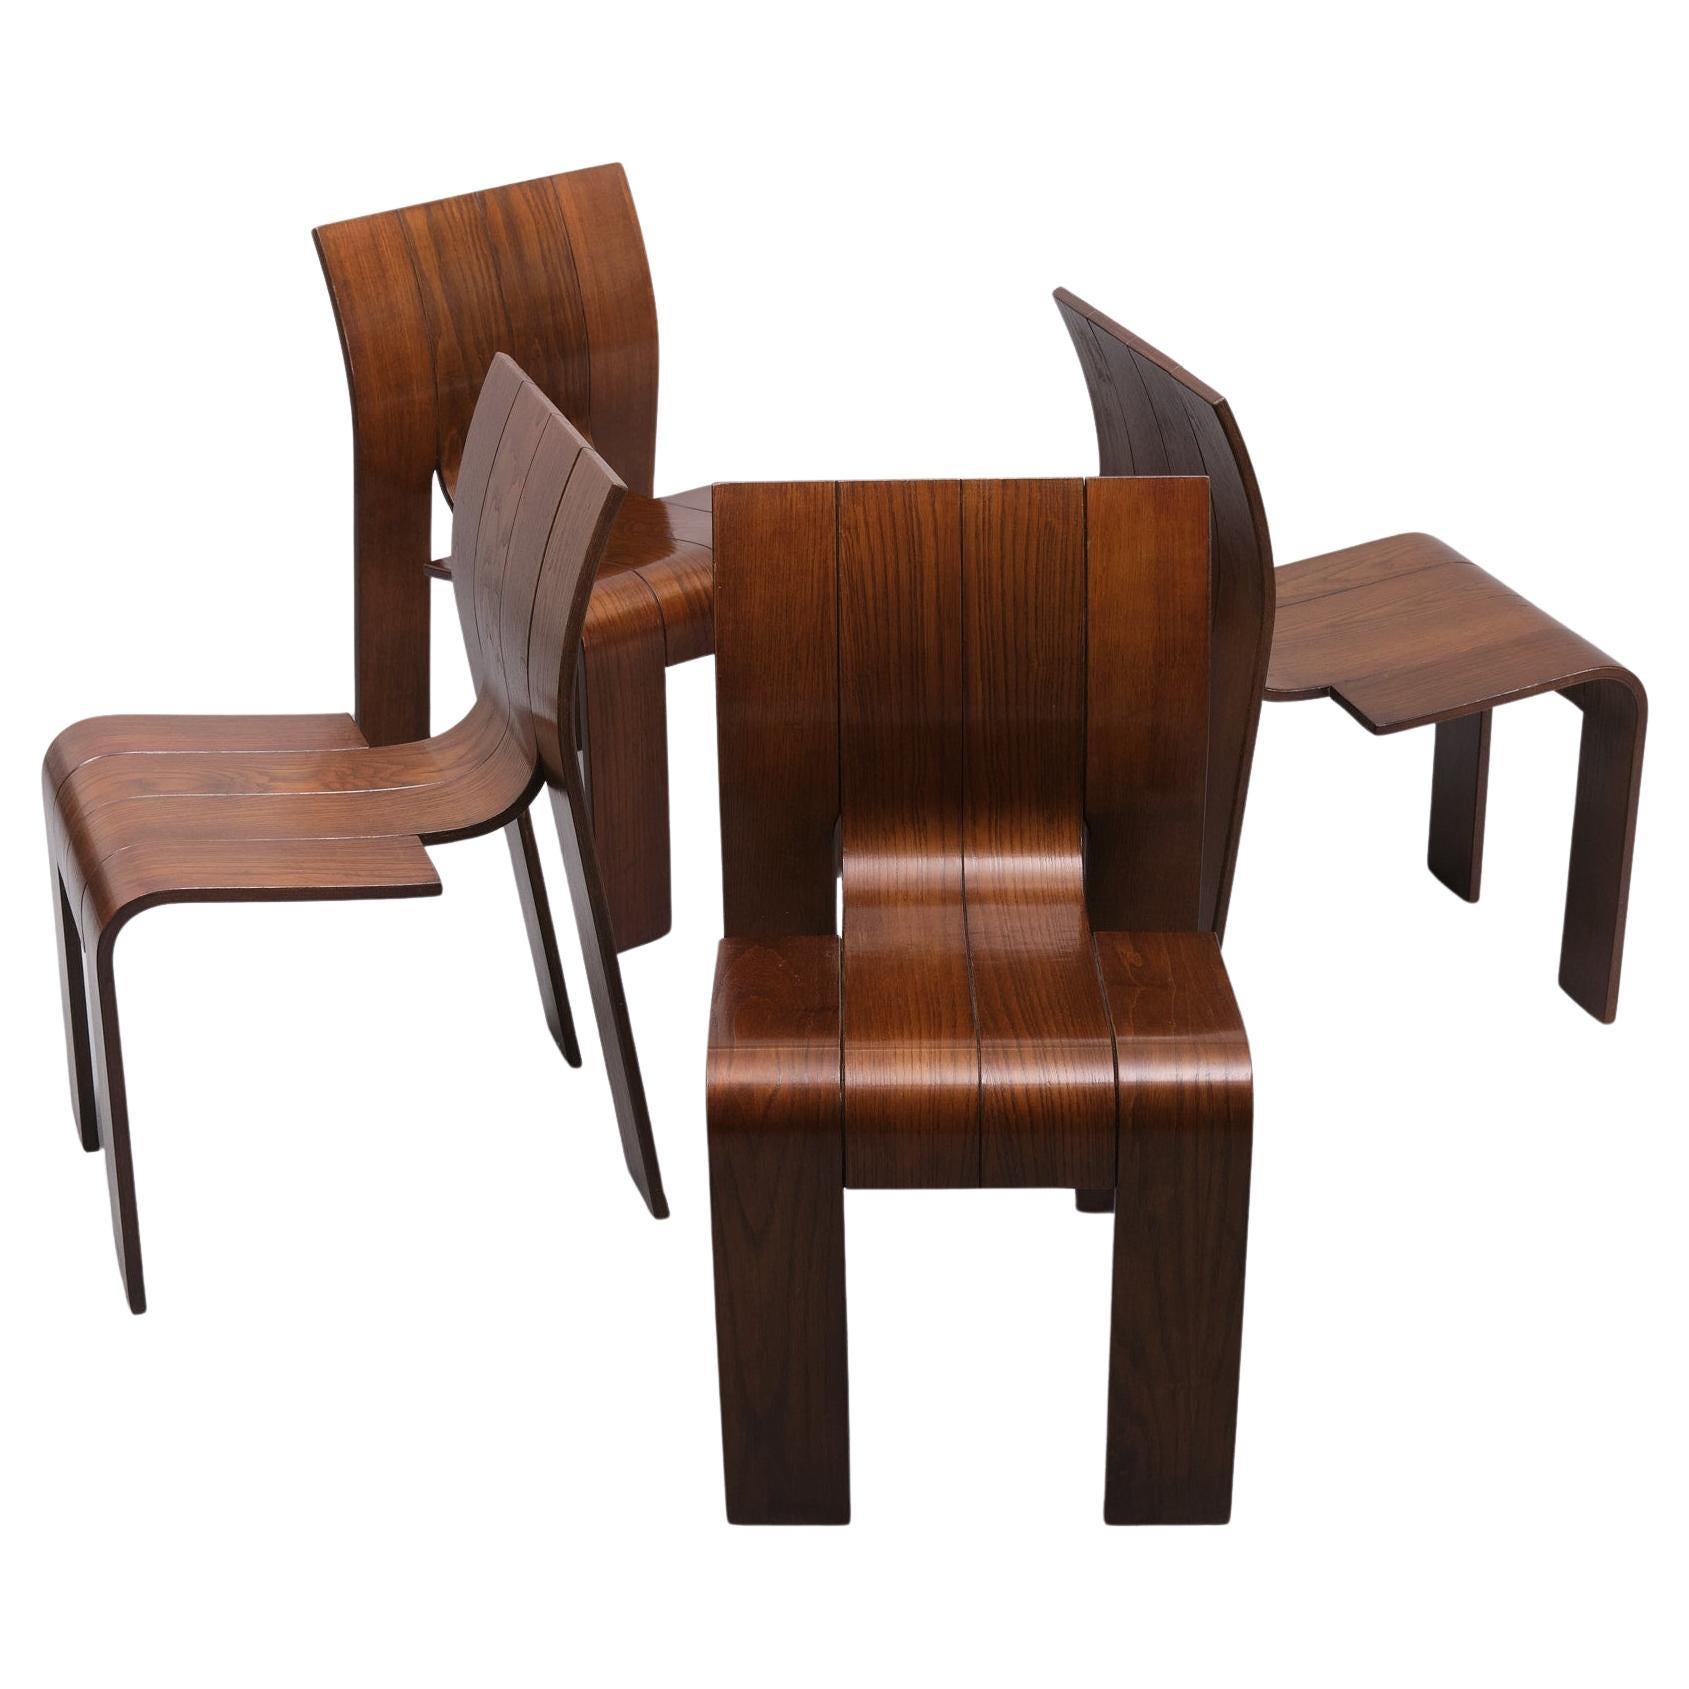 Late 20th Century set of Four Gijs Bakker Strip Chairs 1970s Holland  For Sale